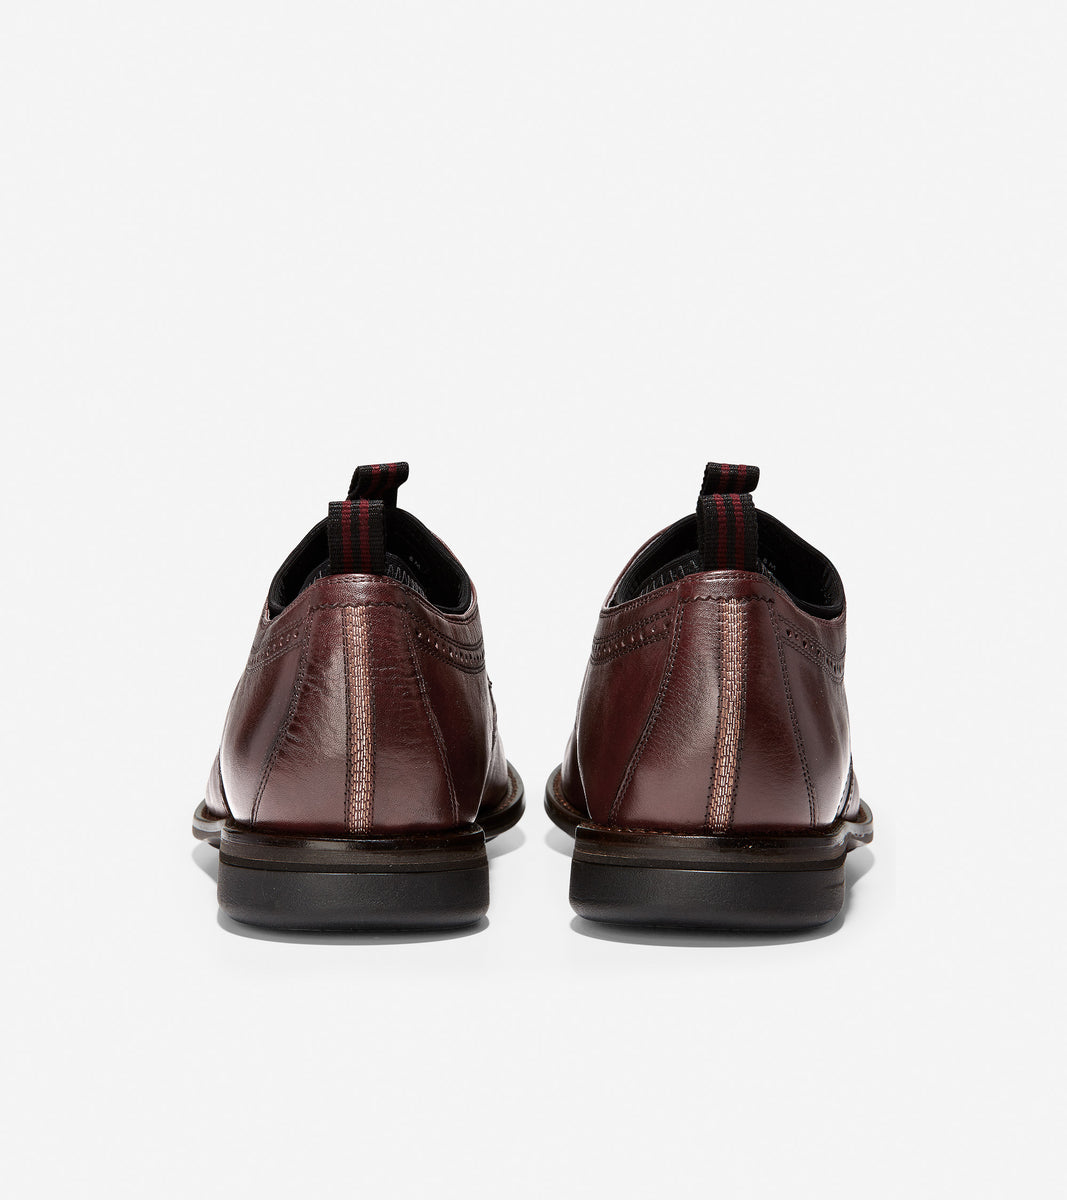 Holland Long Wing Oxford